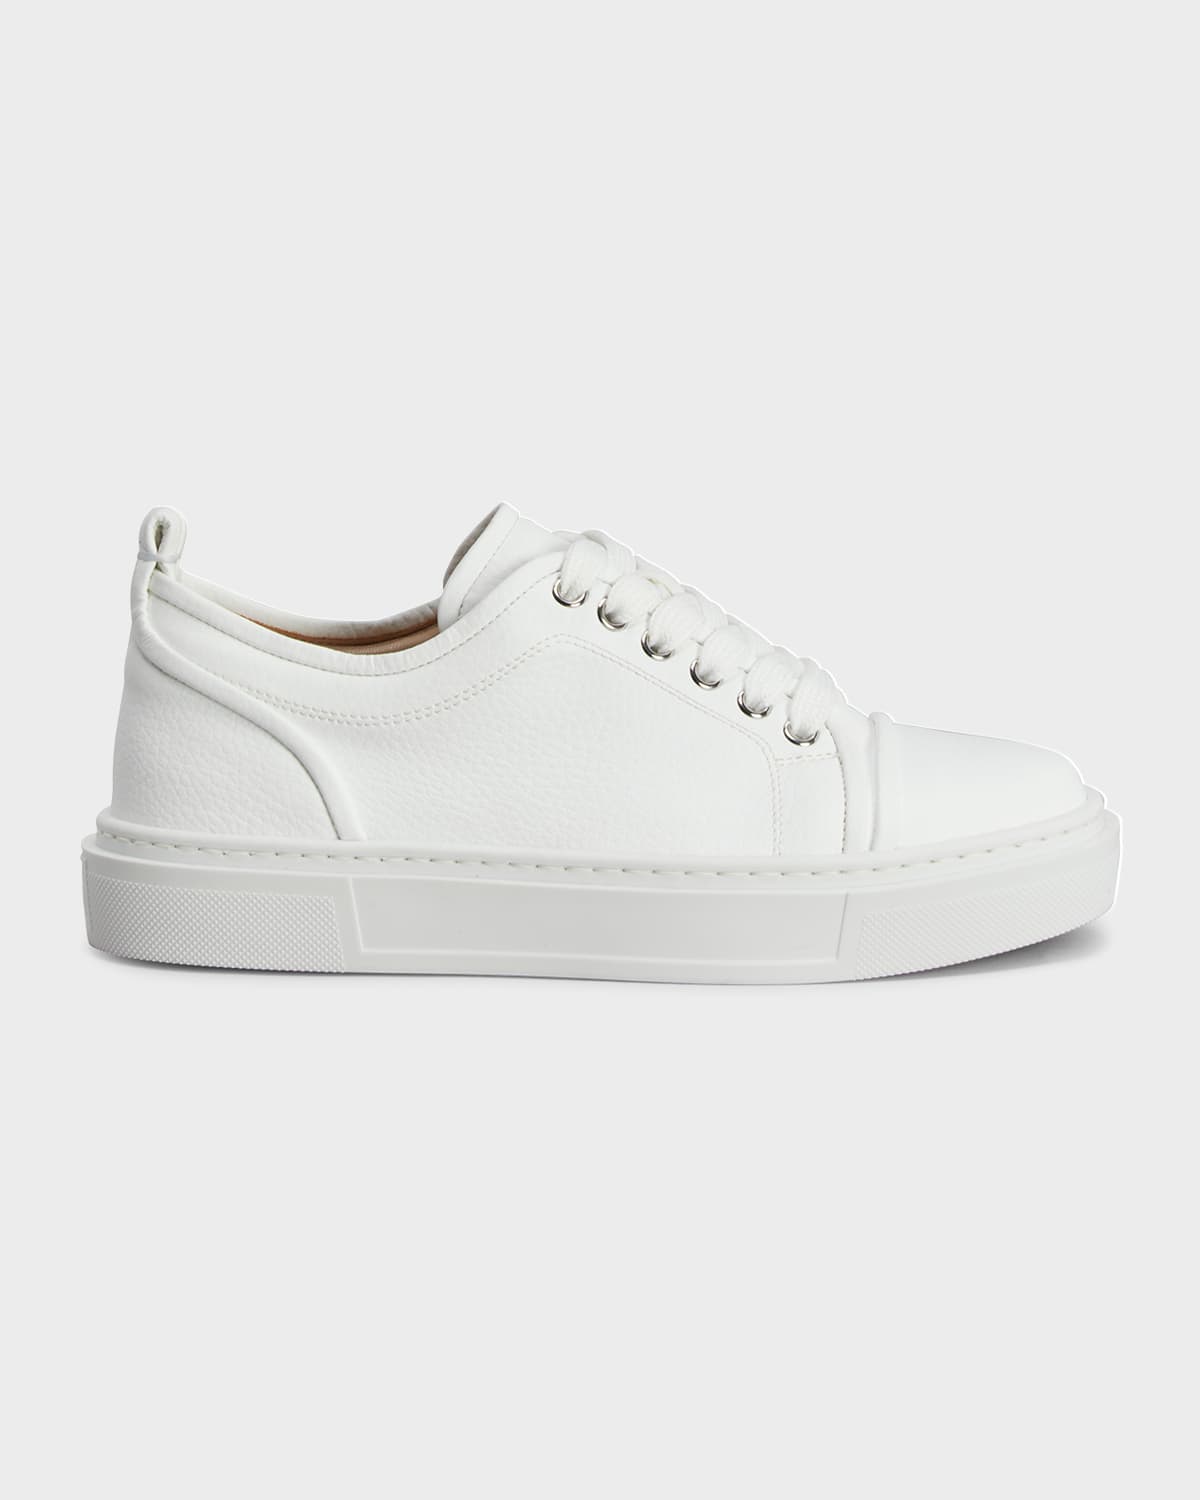 CHRISTIAN LOUBOUTIN ADOLON DONNA LOW-LOP SNEAKERS